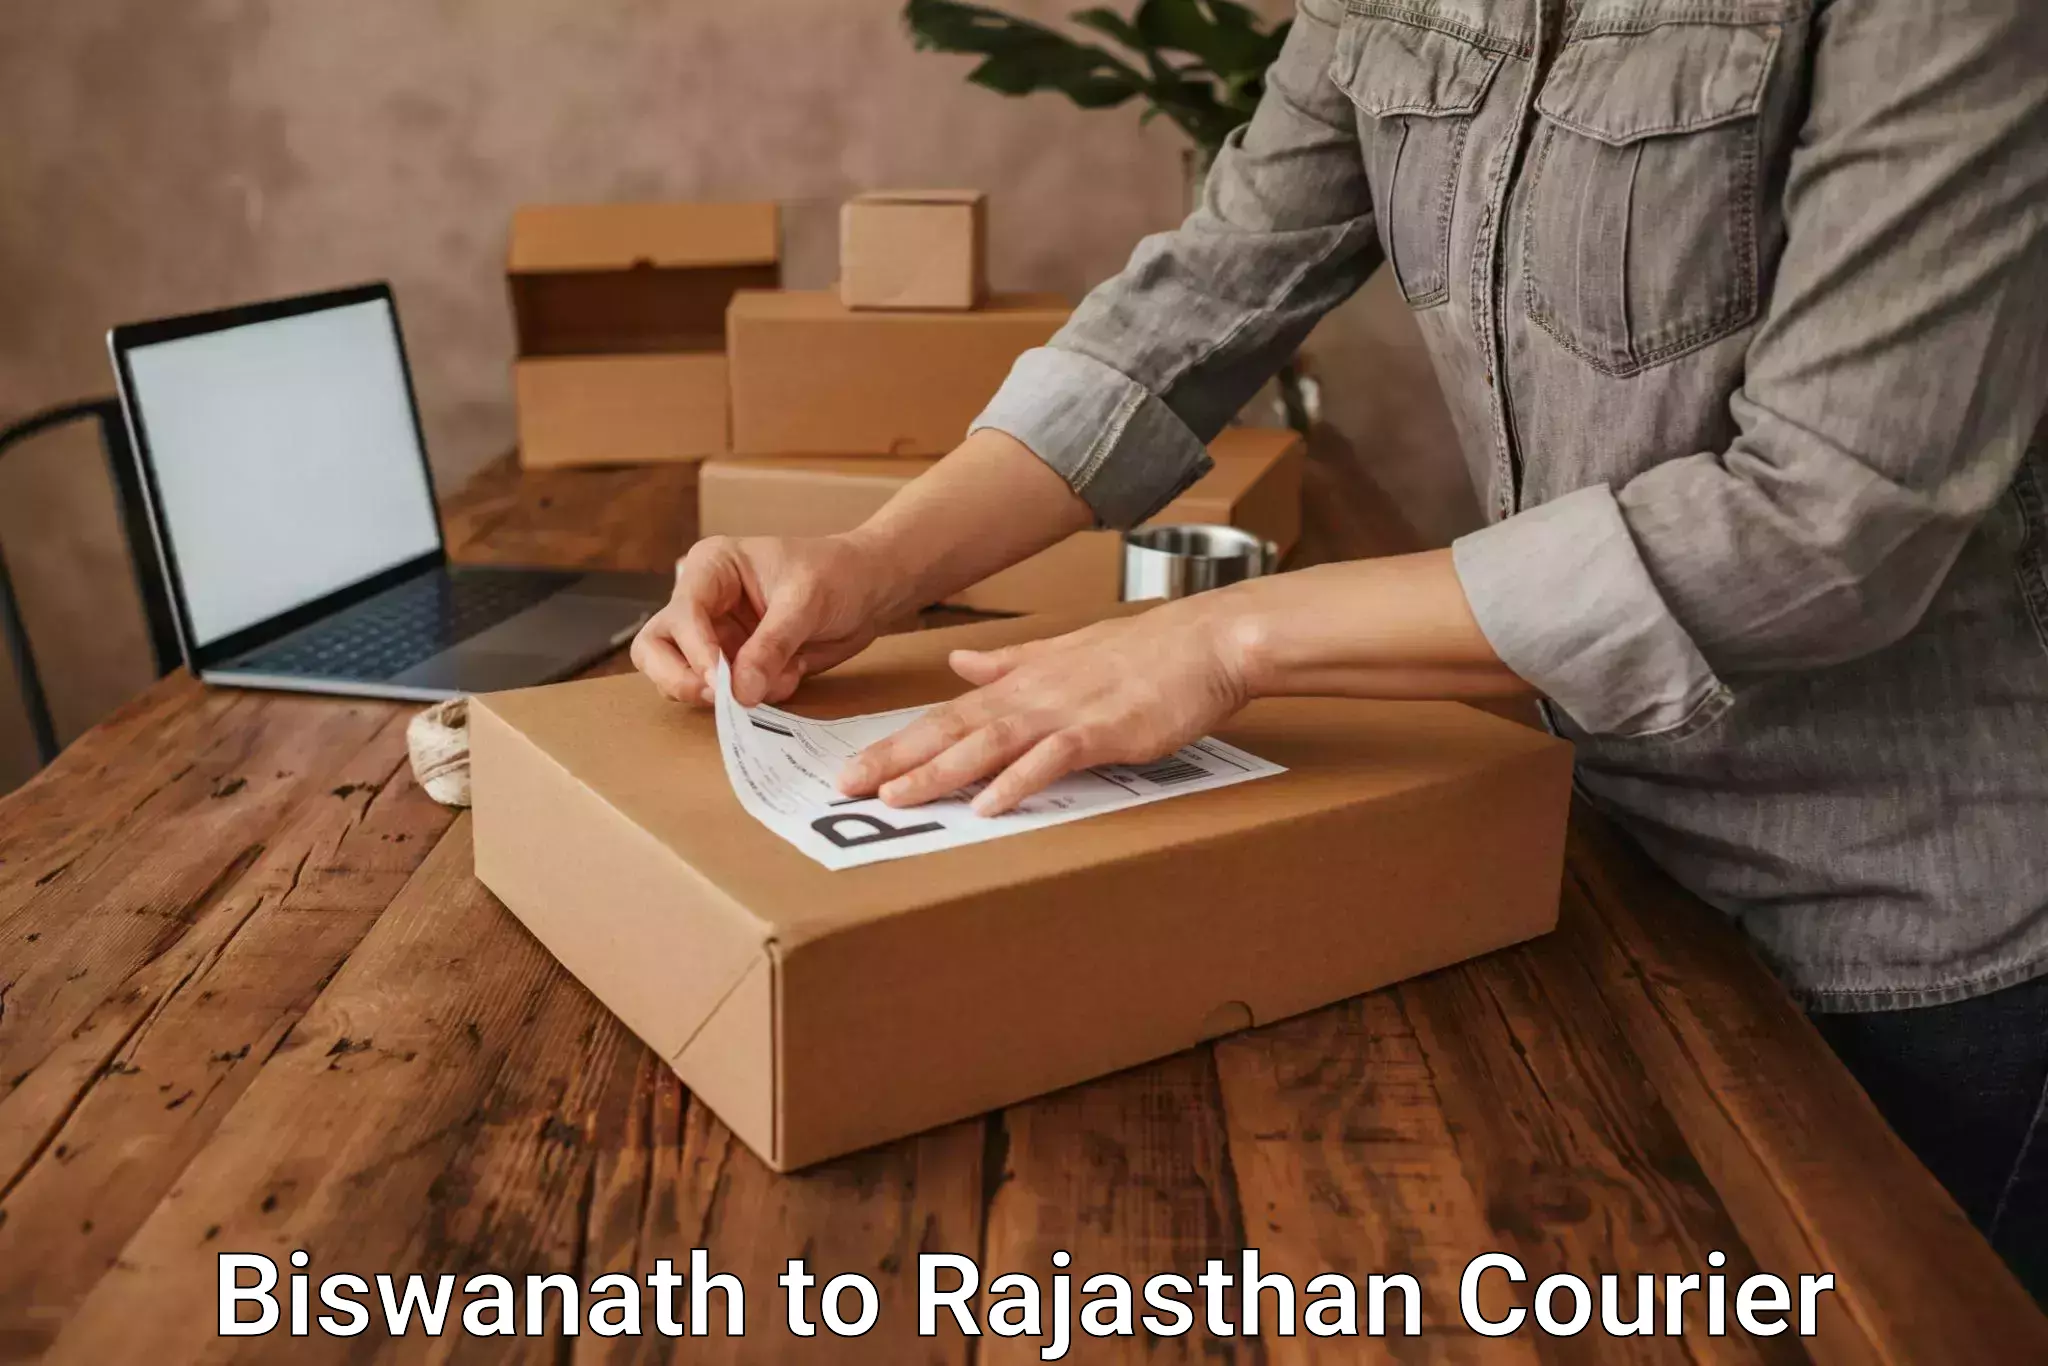 Package delivery network Biswanath to Bhilwara